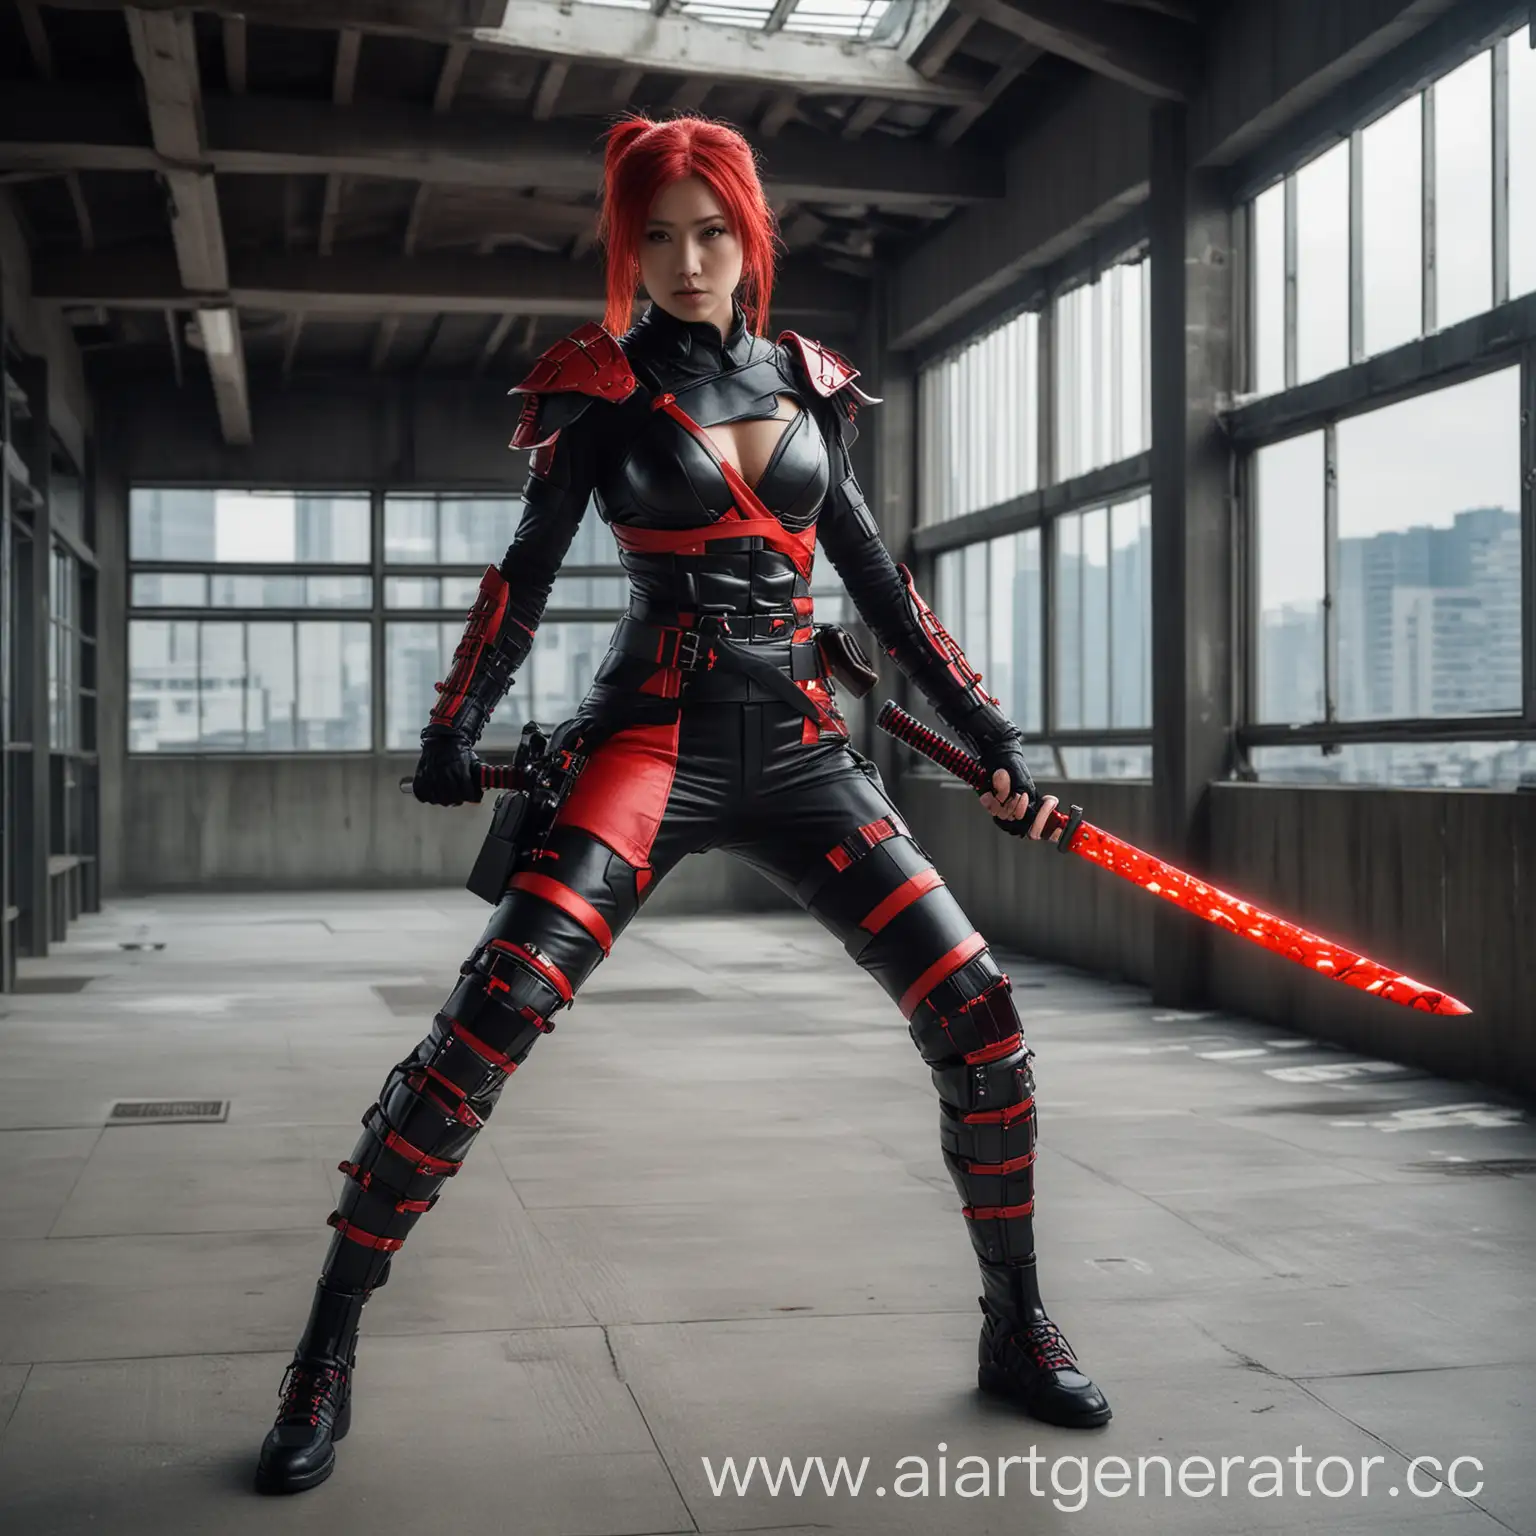 modern shinobi girl, with red photon katana, and cyber ninja suit, in the tokyo building roof